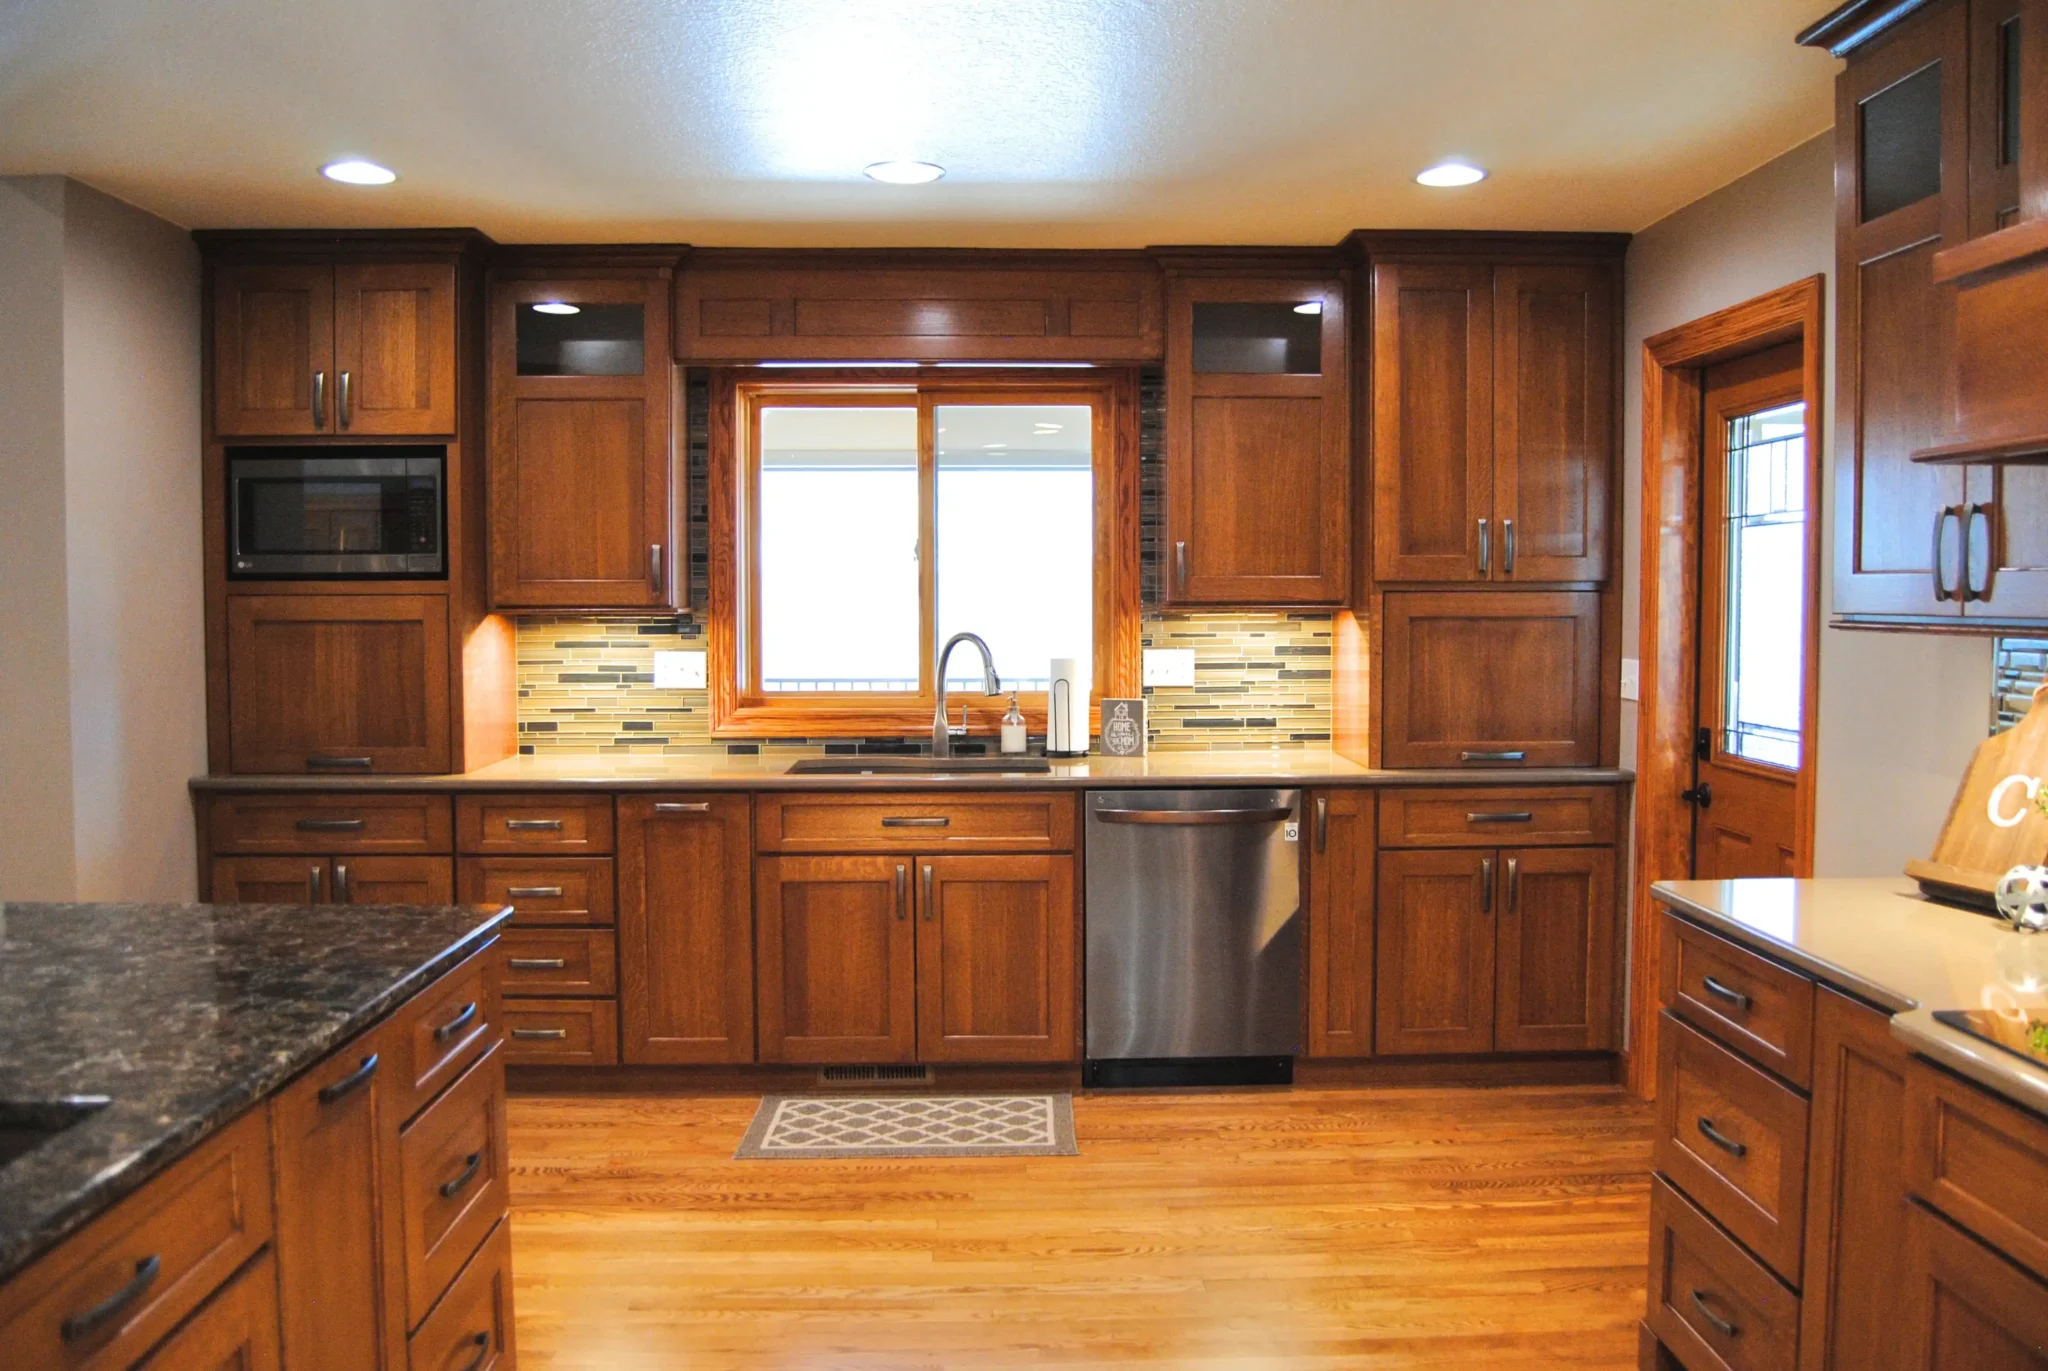 The read oak kitchen area with the designed cabinets